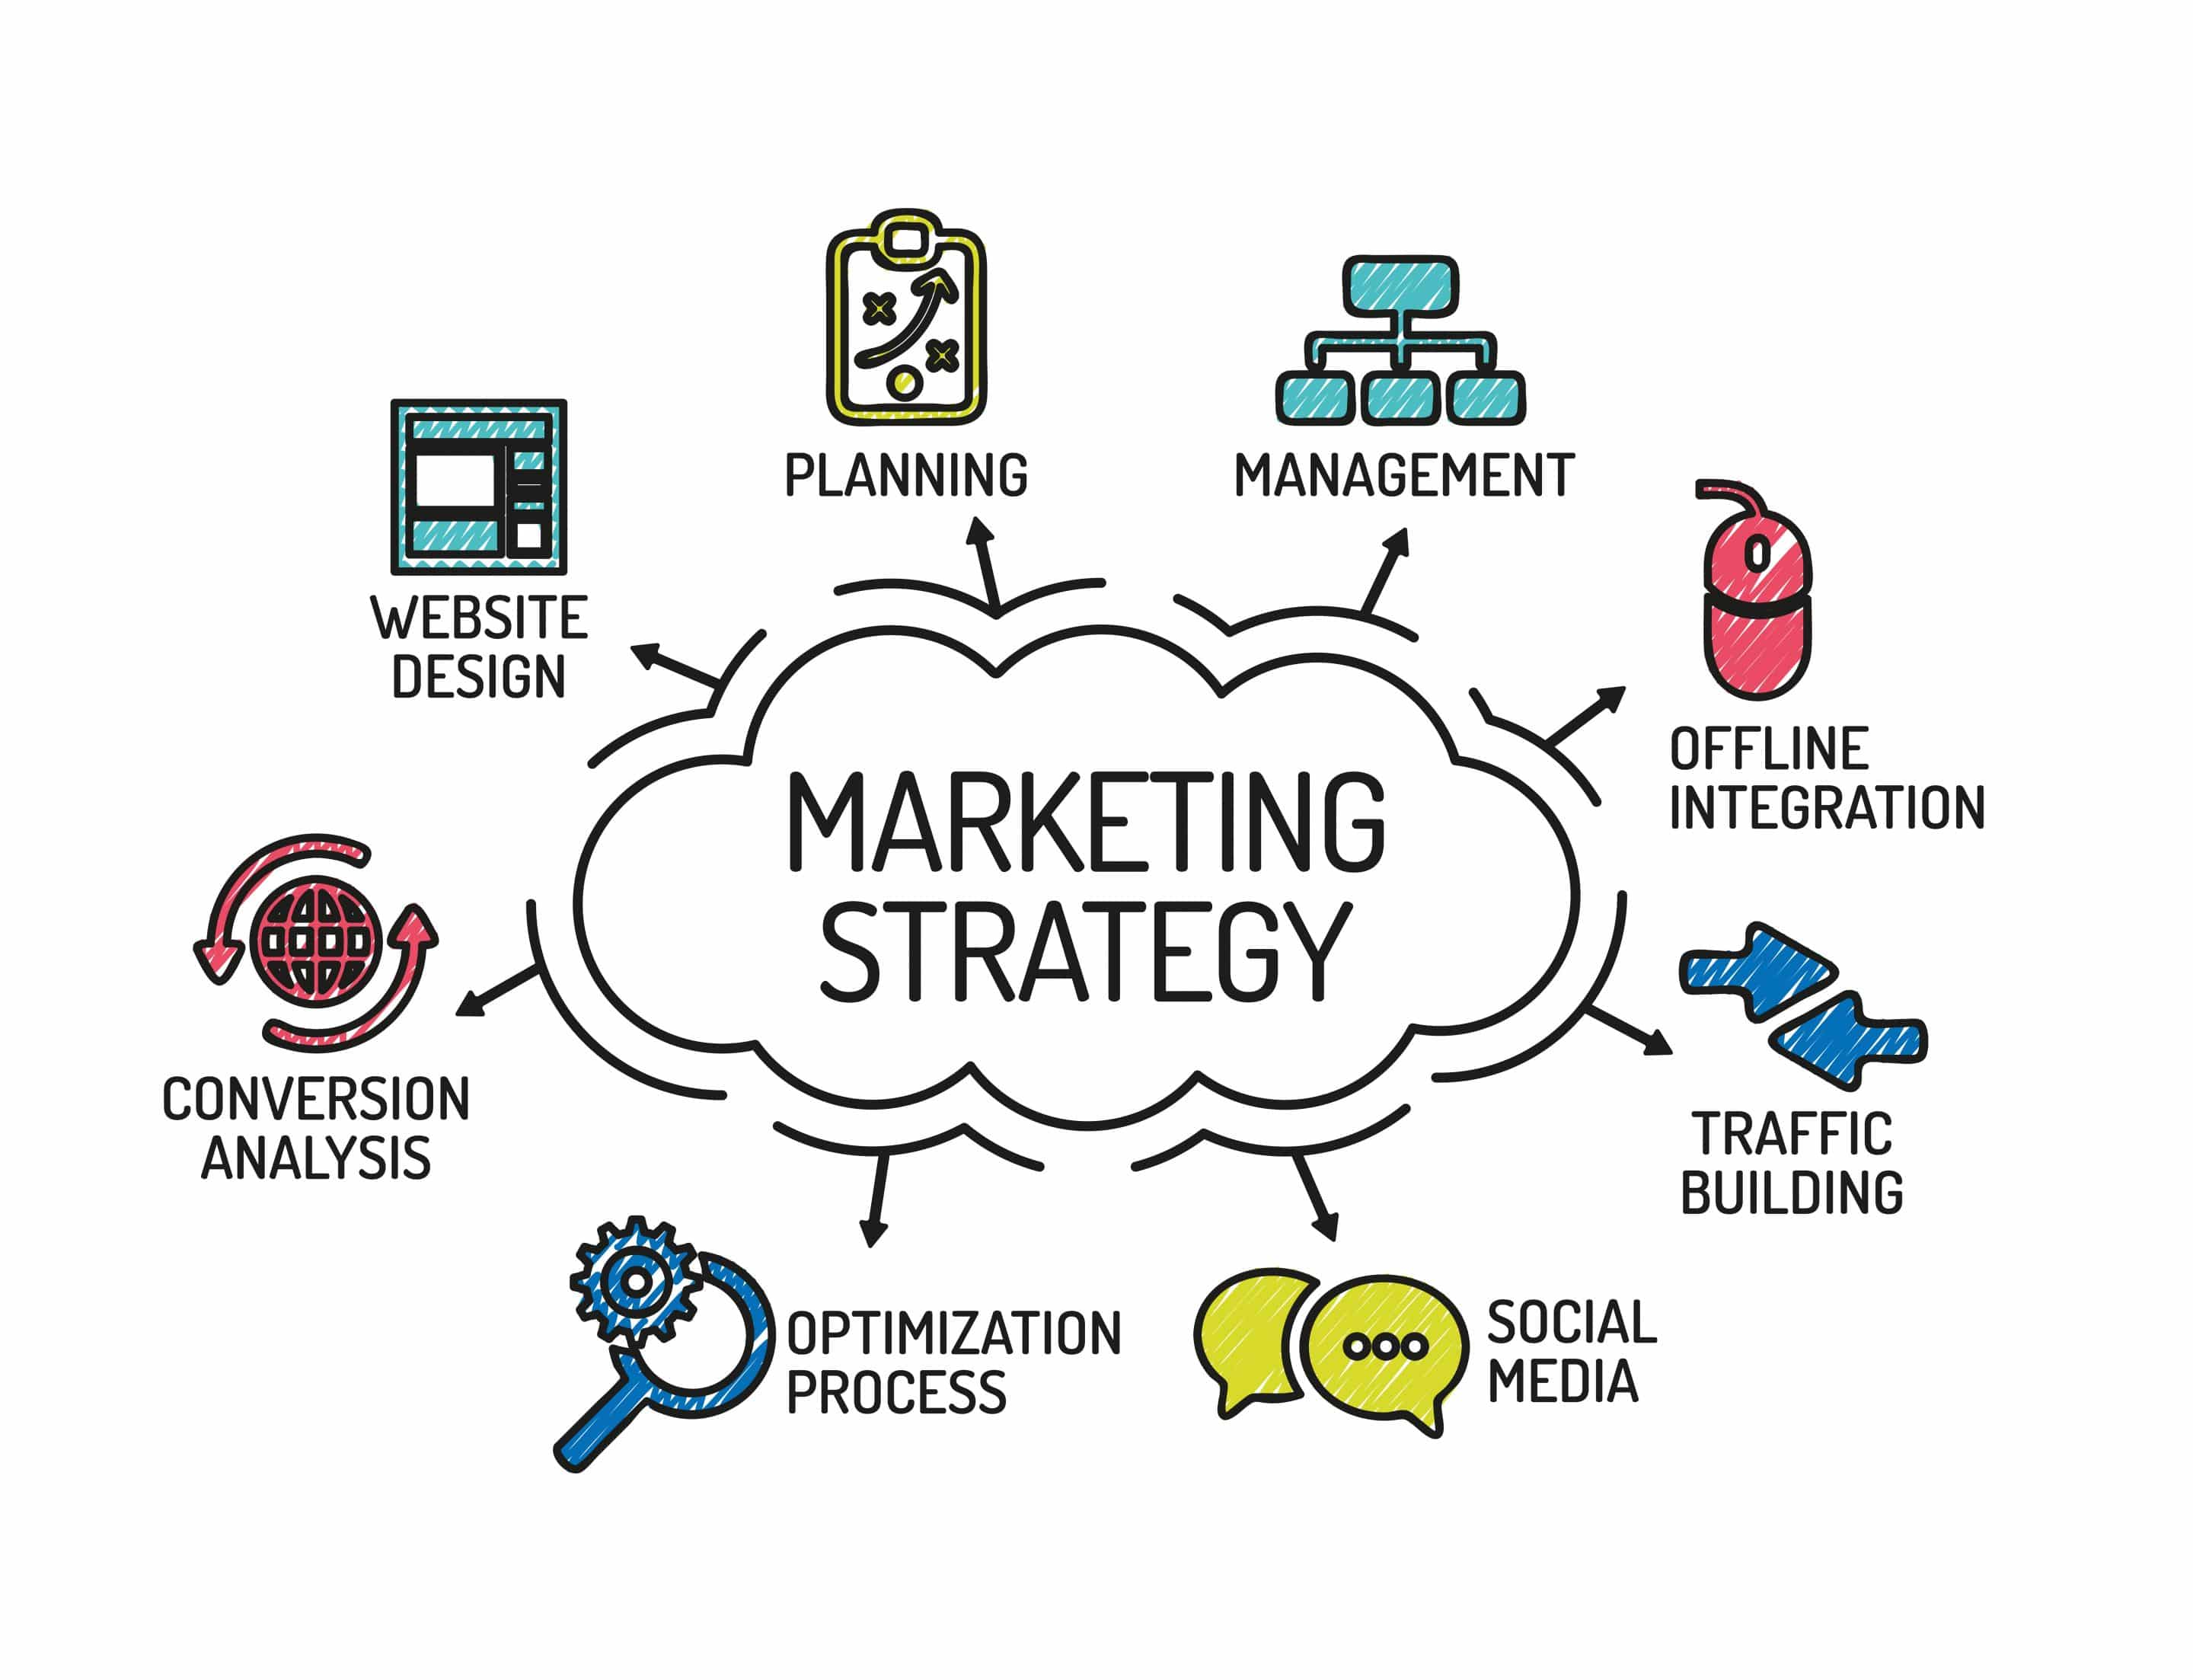 The Specifics How Does Your Field Change Your Marketing Strategy